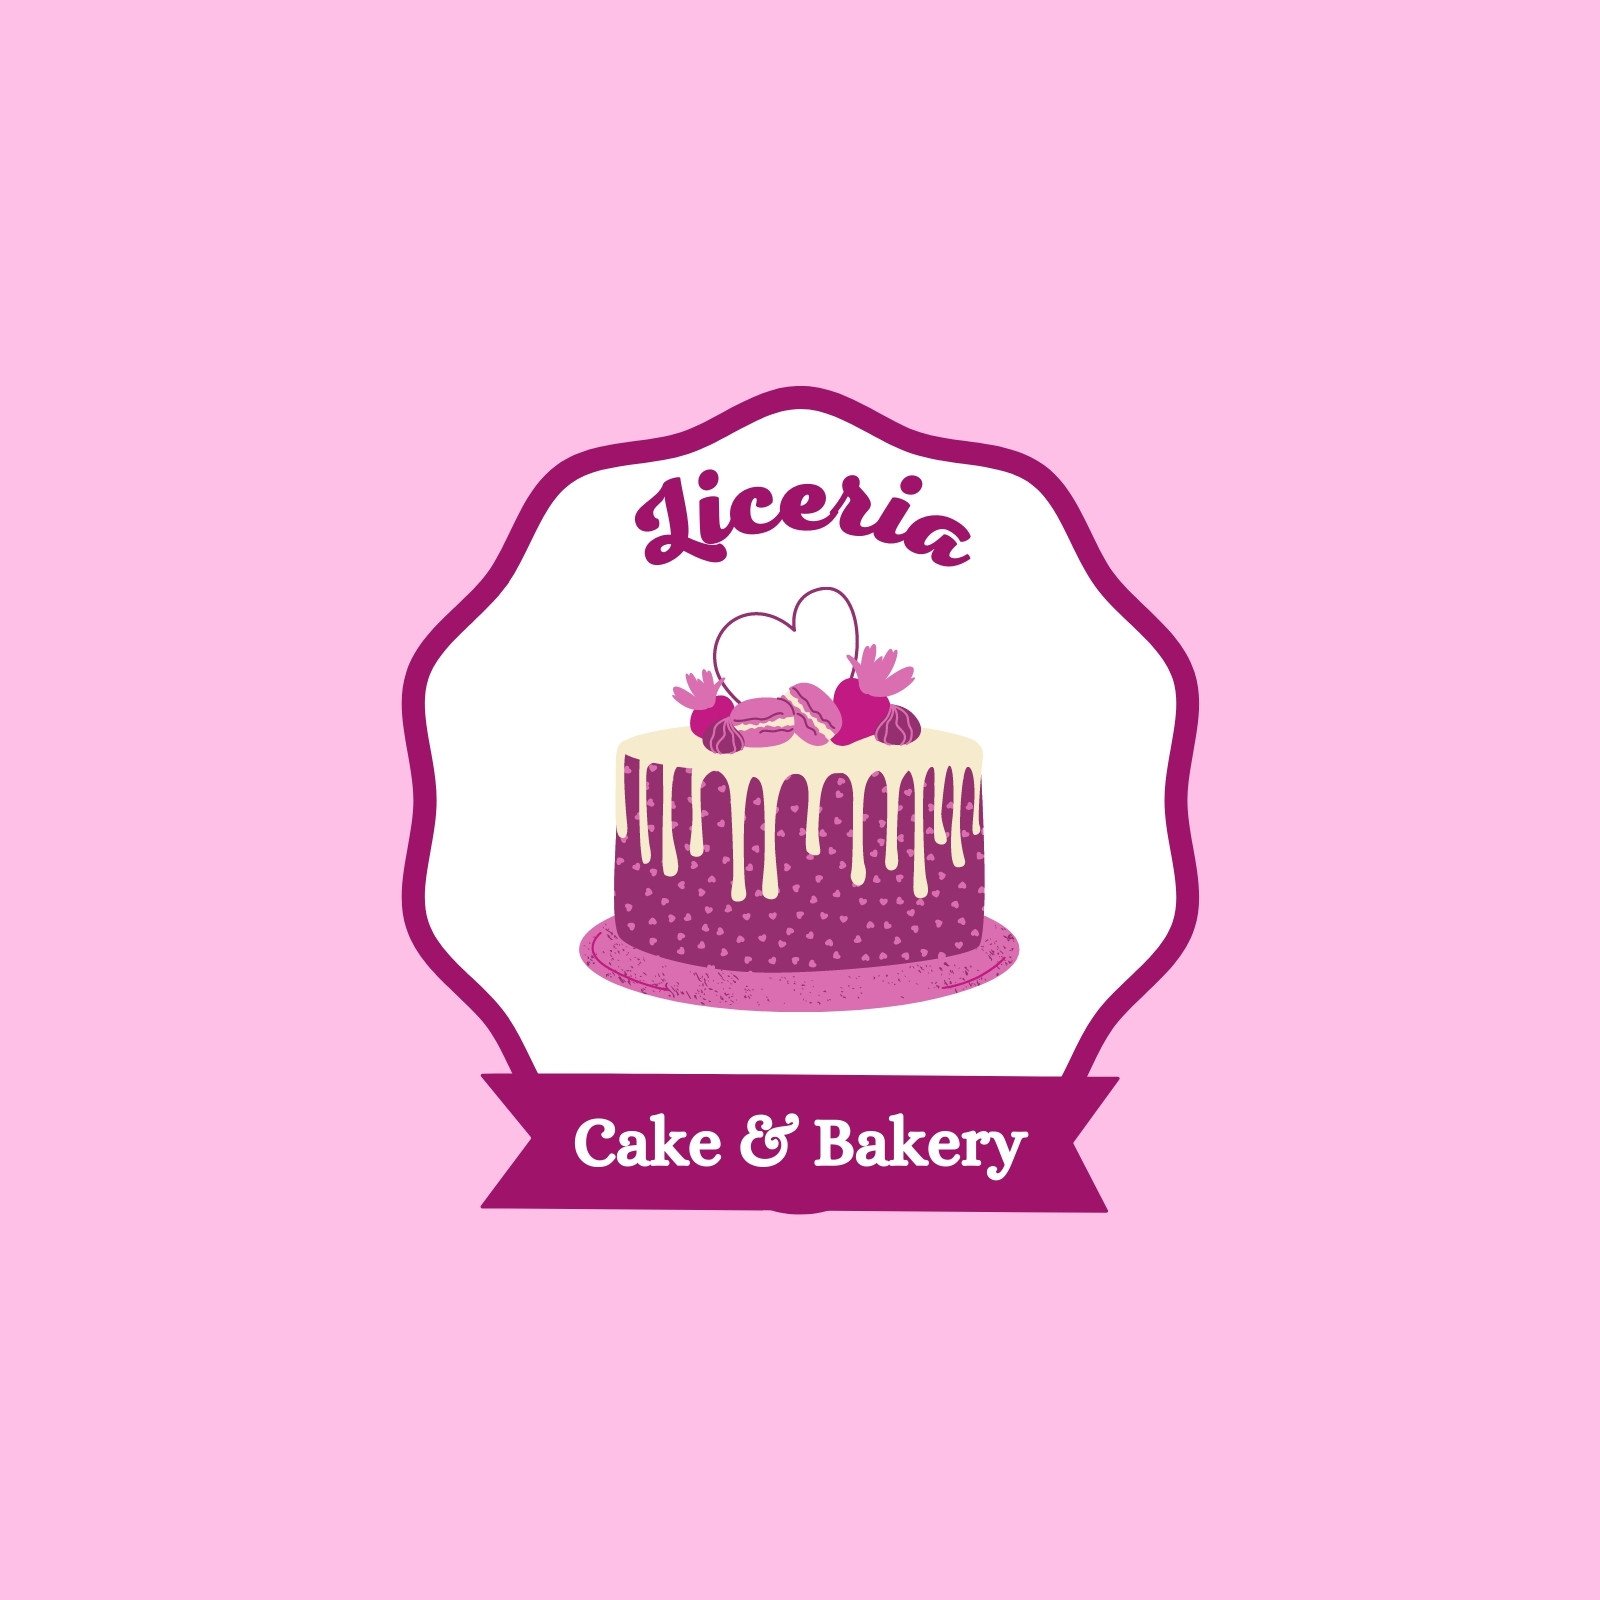 I love how cute my Victoria's Cakes cartoon logo came out 🥰  @cartoon_logostore did such a great job! #baker #homebaker #cakedecorat...  | Instagram